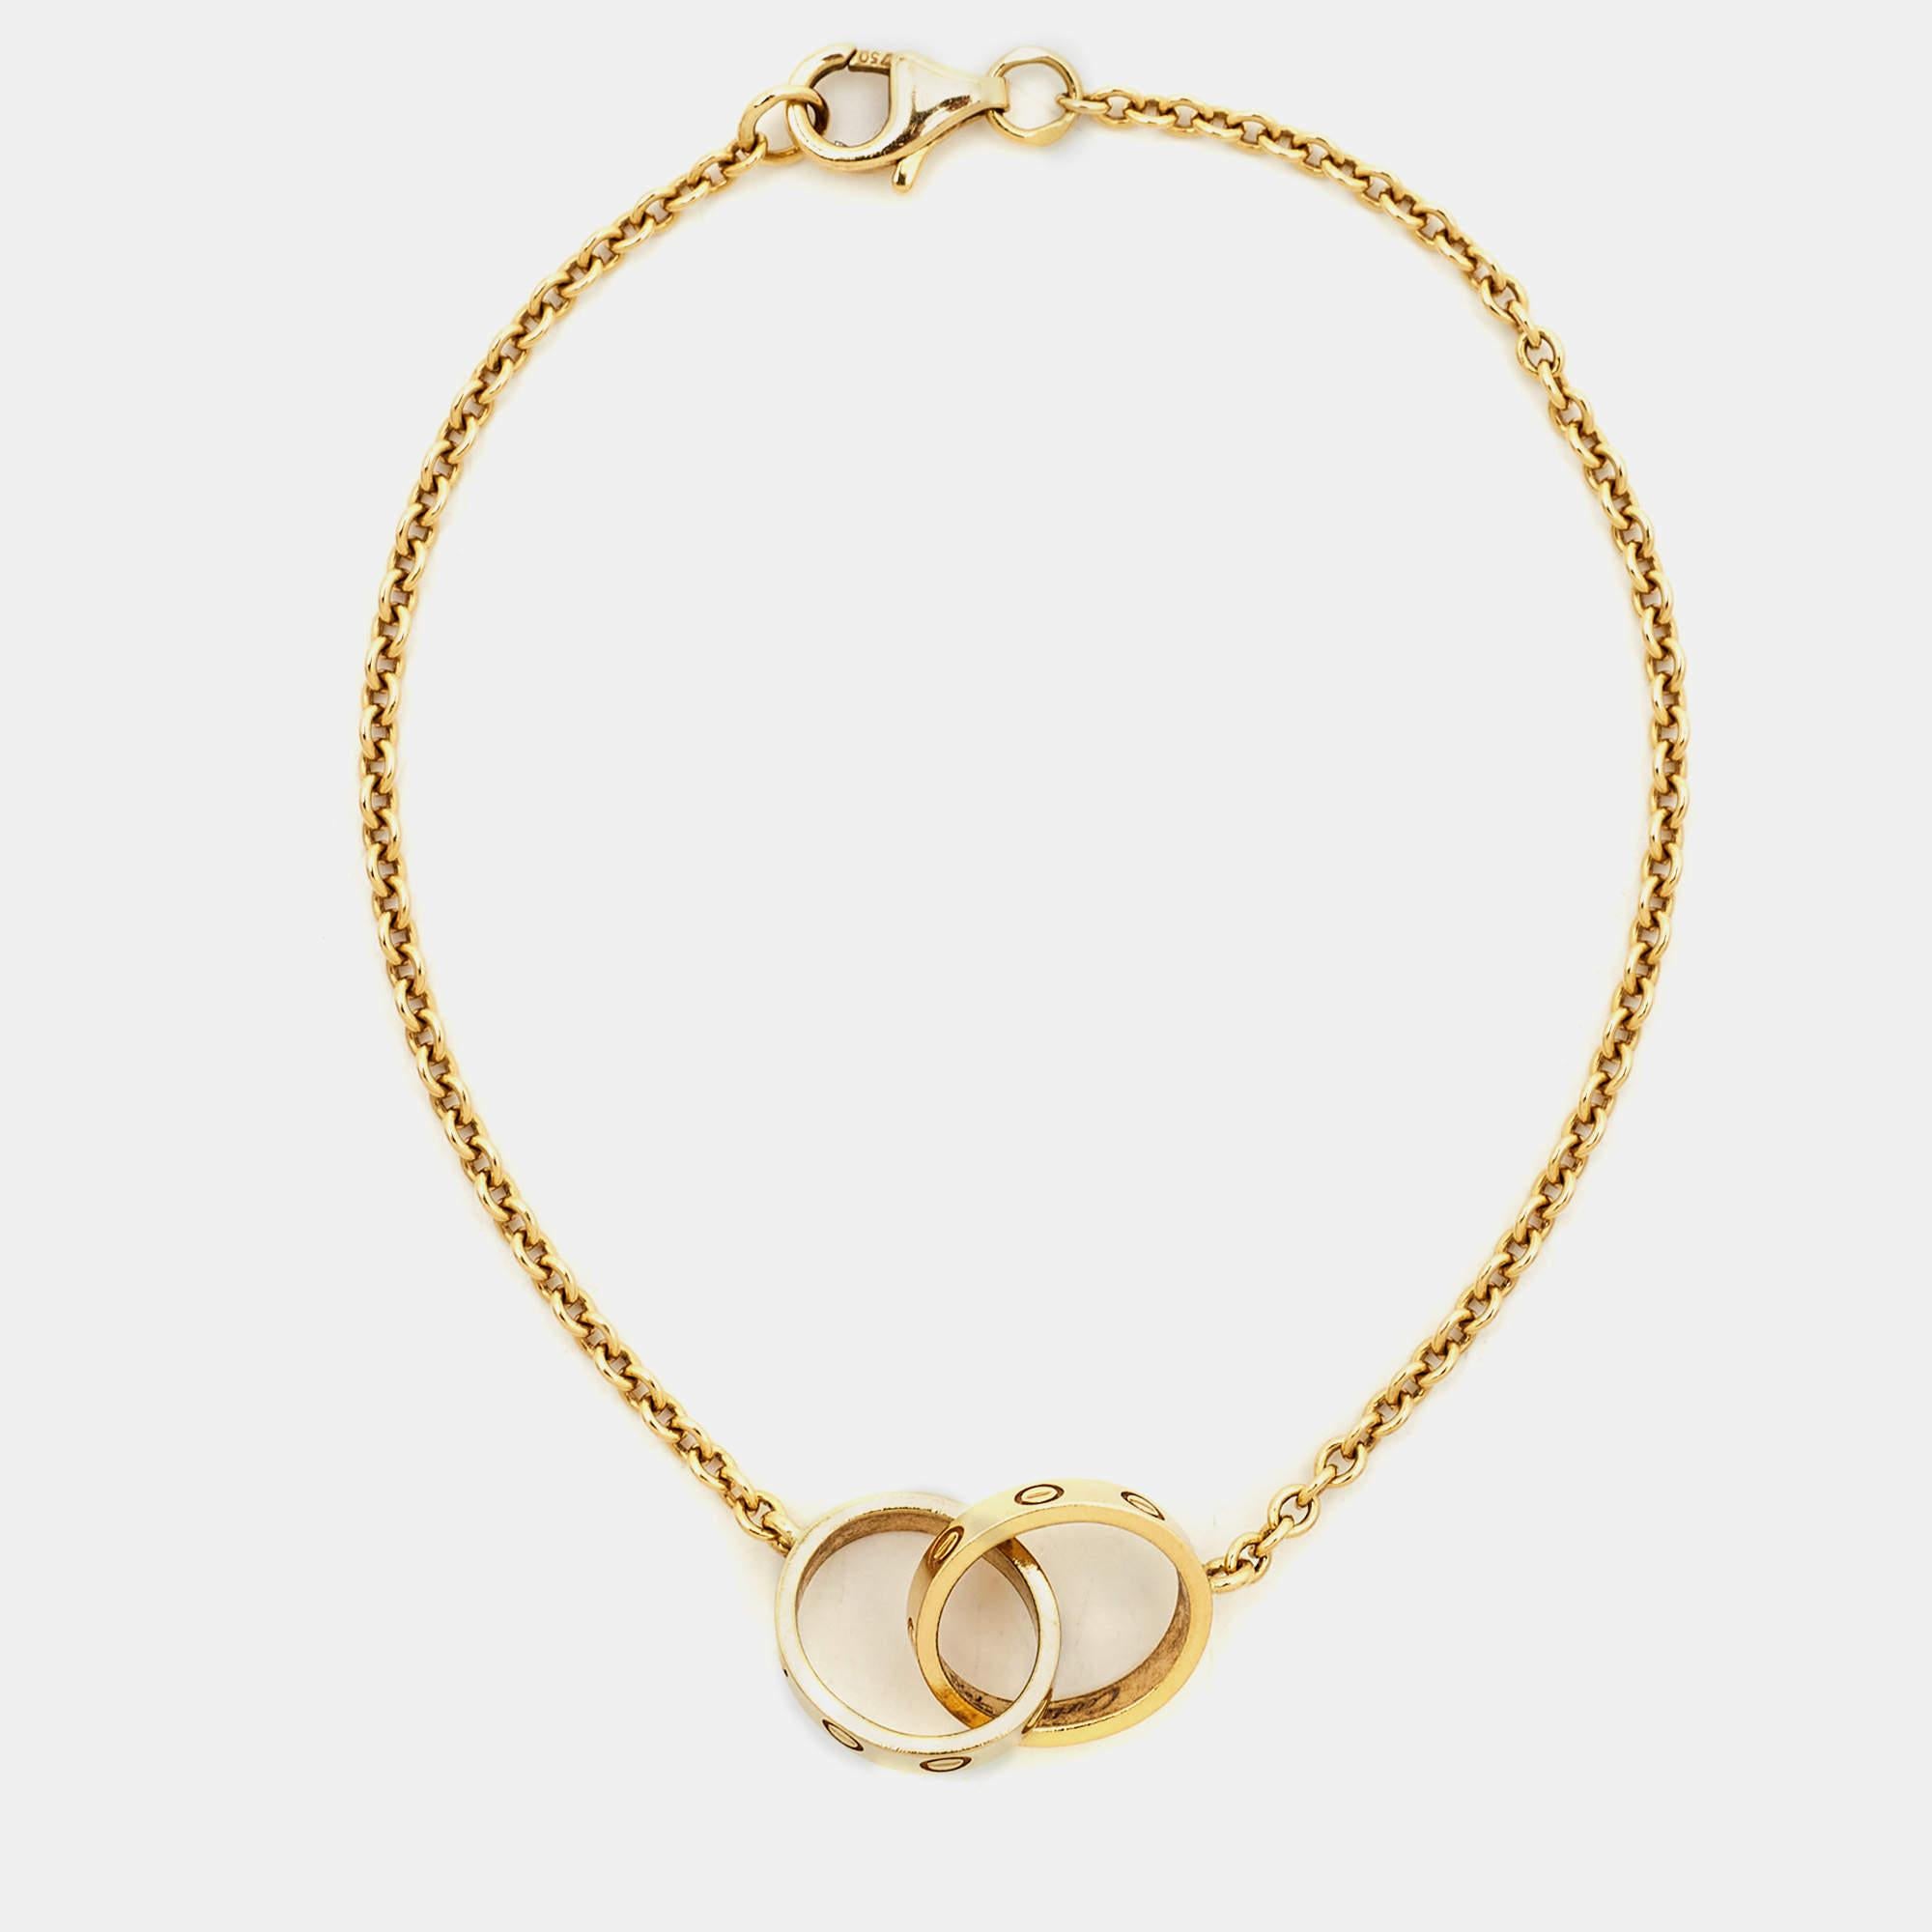 Celebrate timeless love with this bracelet from Cartier's Love collection. Made from 18k yellow gold, it has a chain that holds two magnificent rings interlocked with one another. On both, one can see the iconic screw motifs — a signature of the